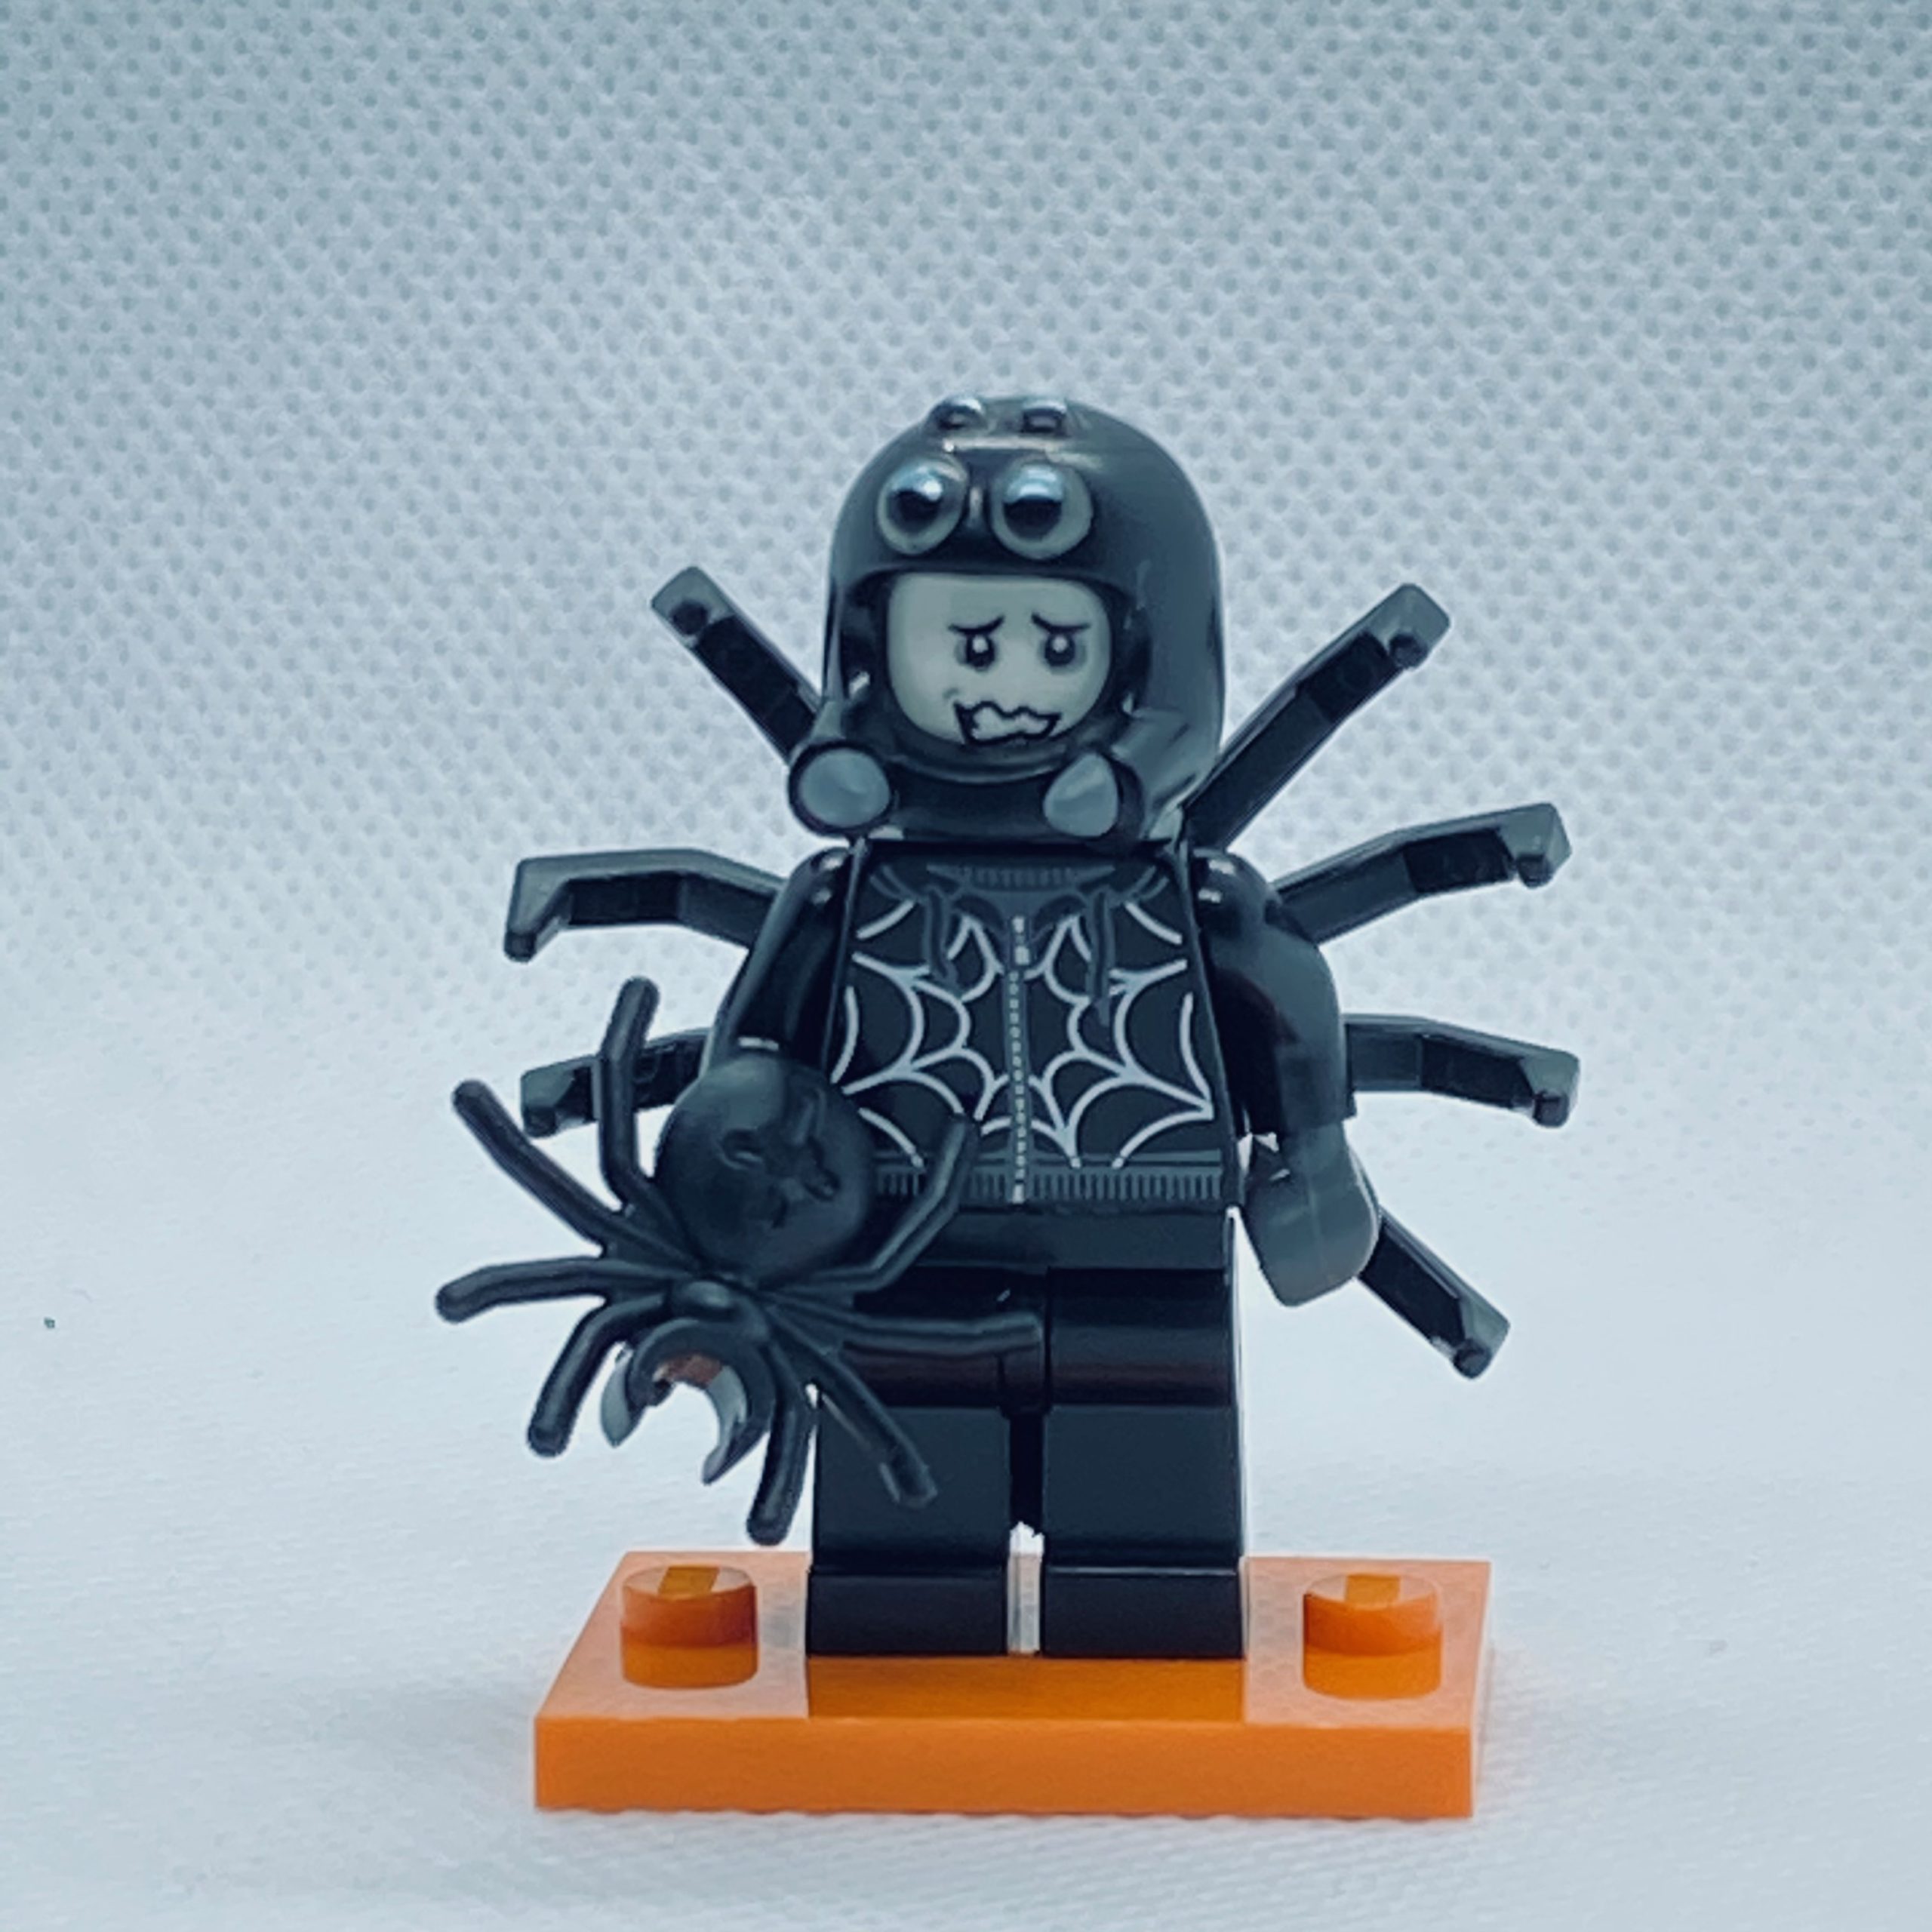 LEGO MINIFIGURE SERIES 18 PARTY SPIDER SUIT GUY 71021 BUY ANY 3 GET 4TH FREE 